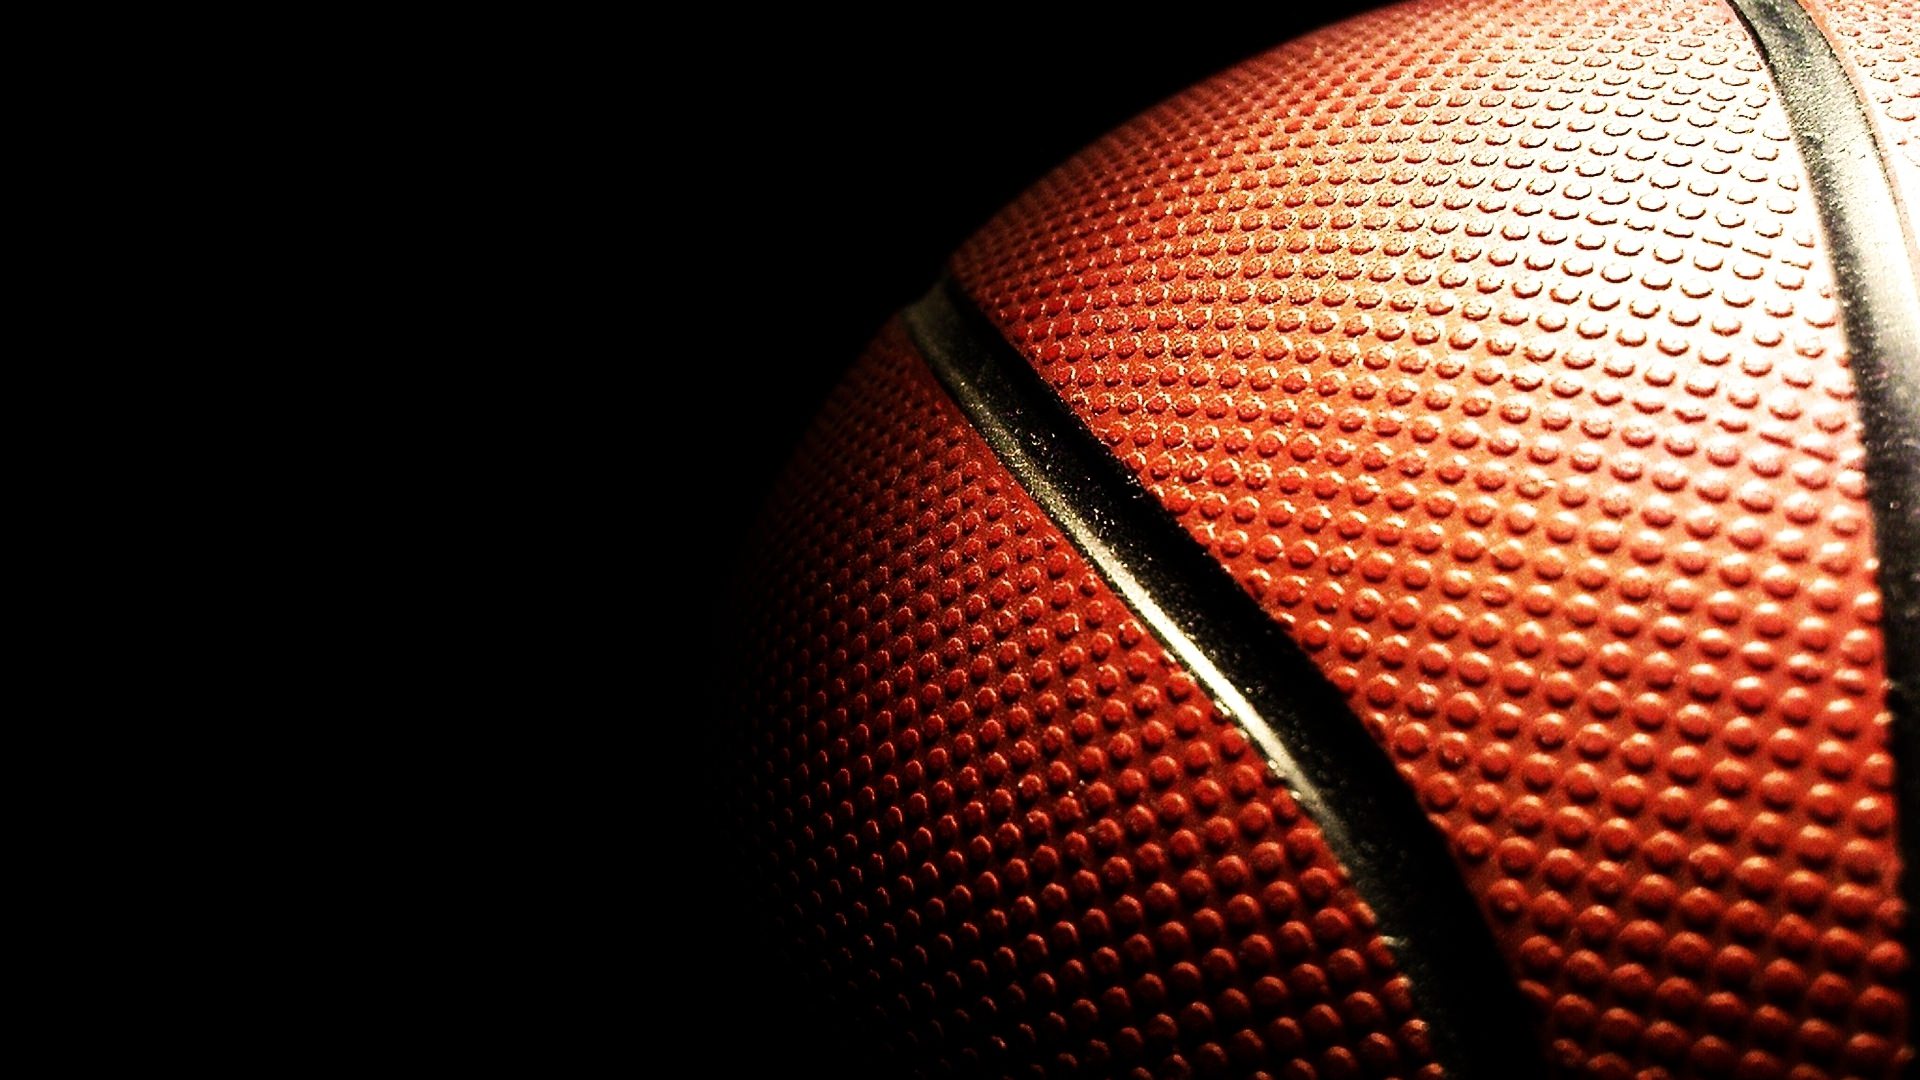 25+ Basketball Wallpapers, Backgrounds, Images,Pictures | Design Trends